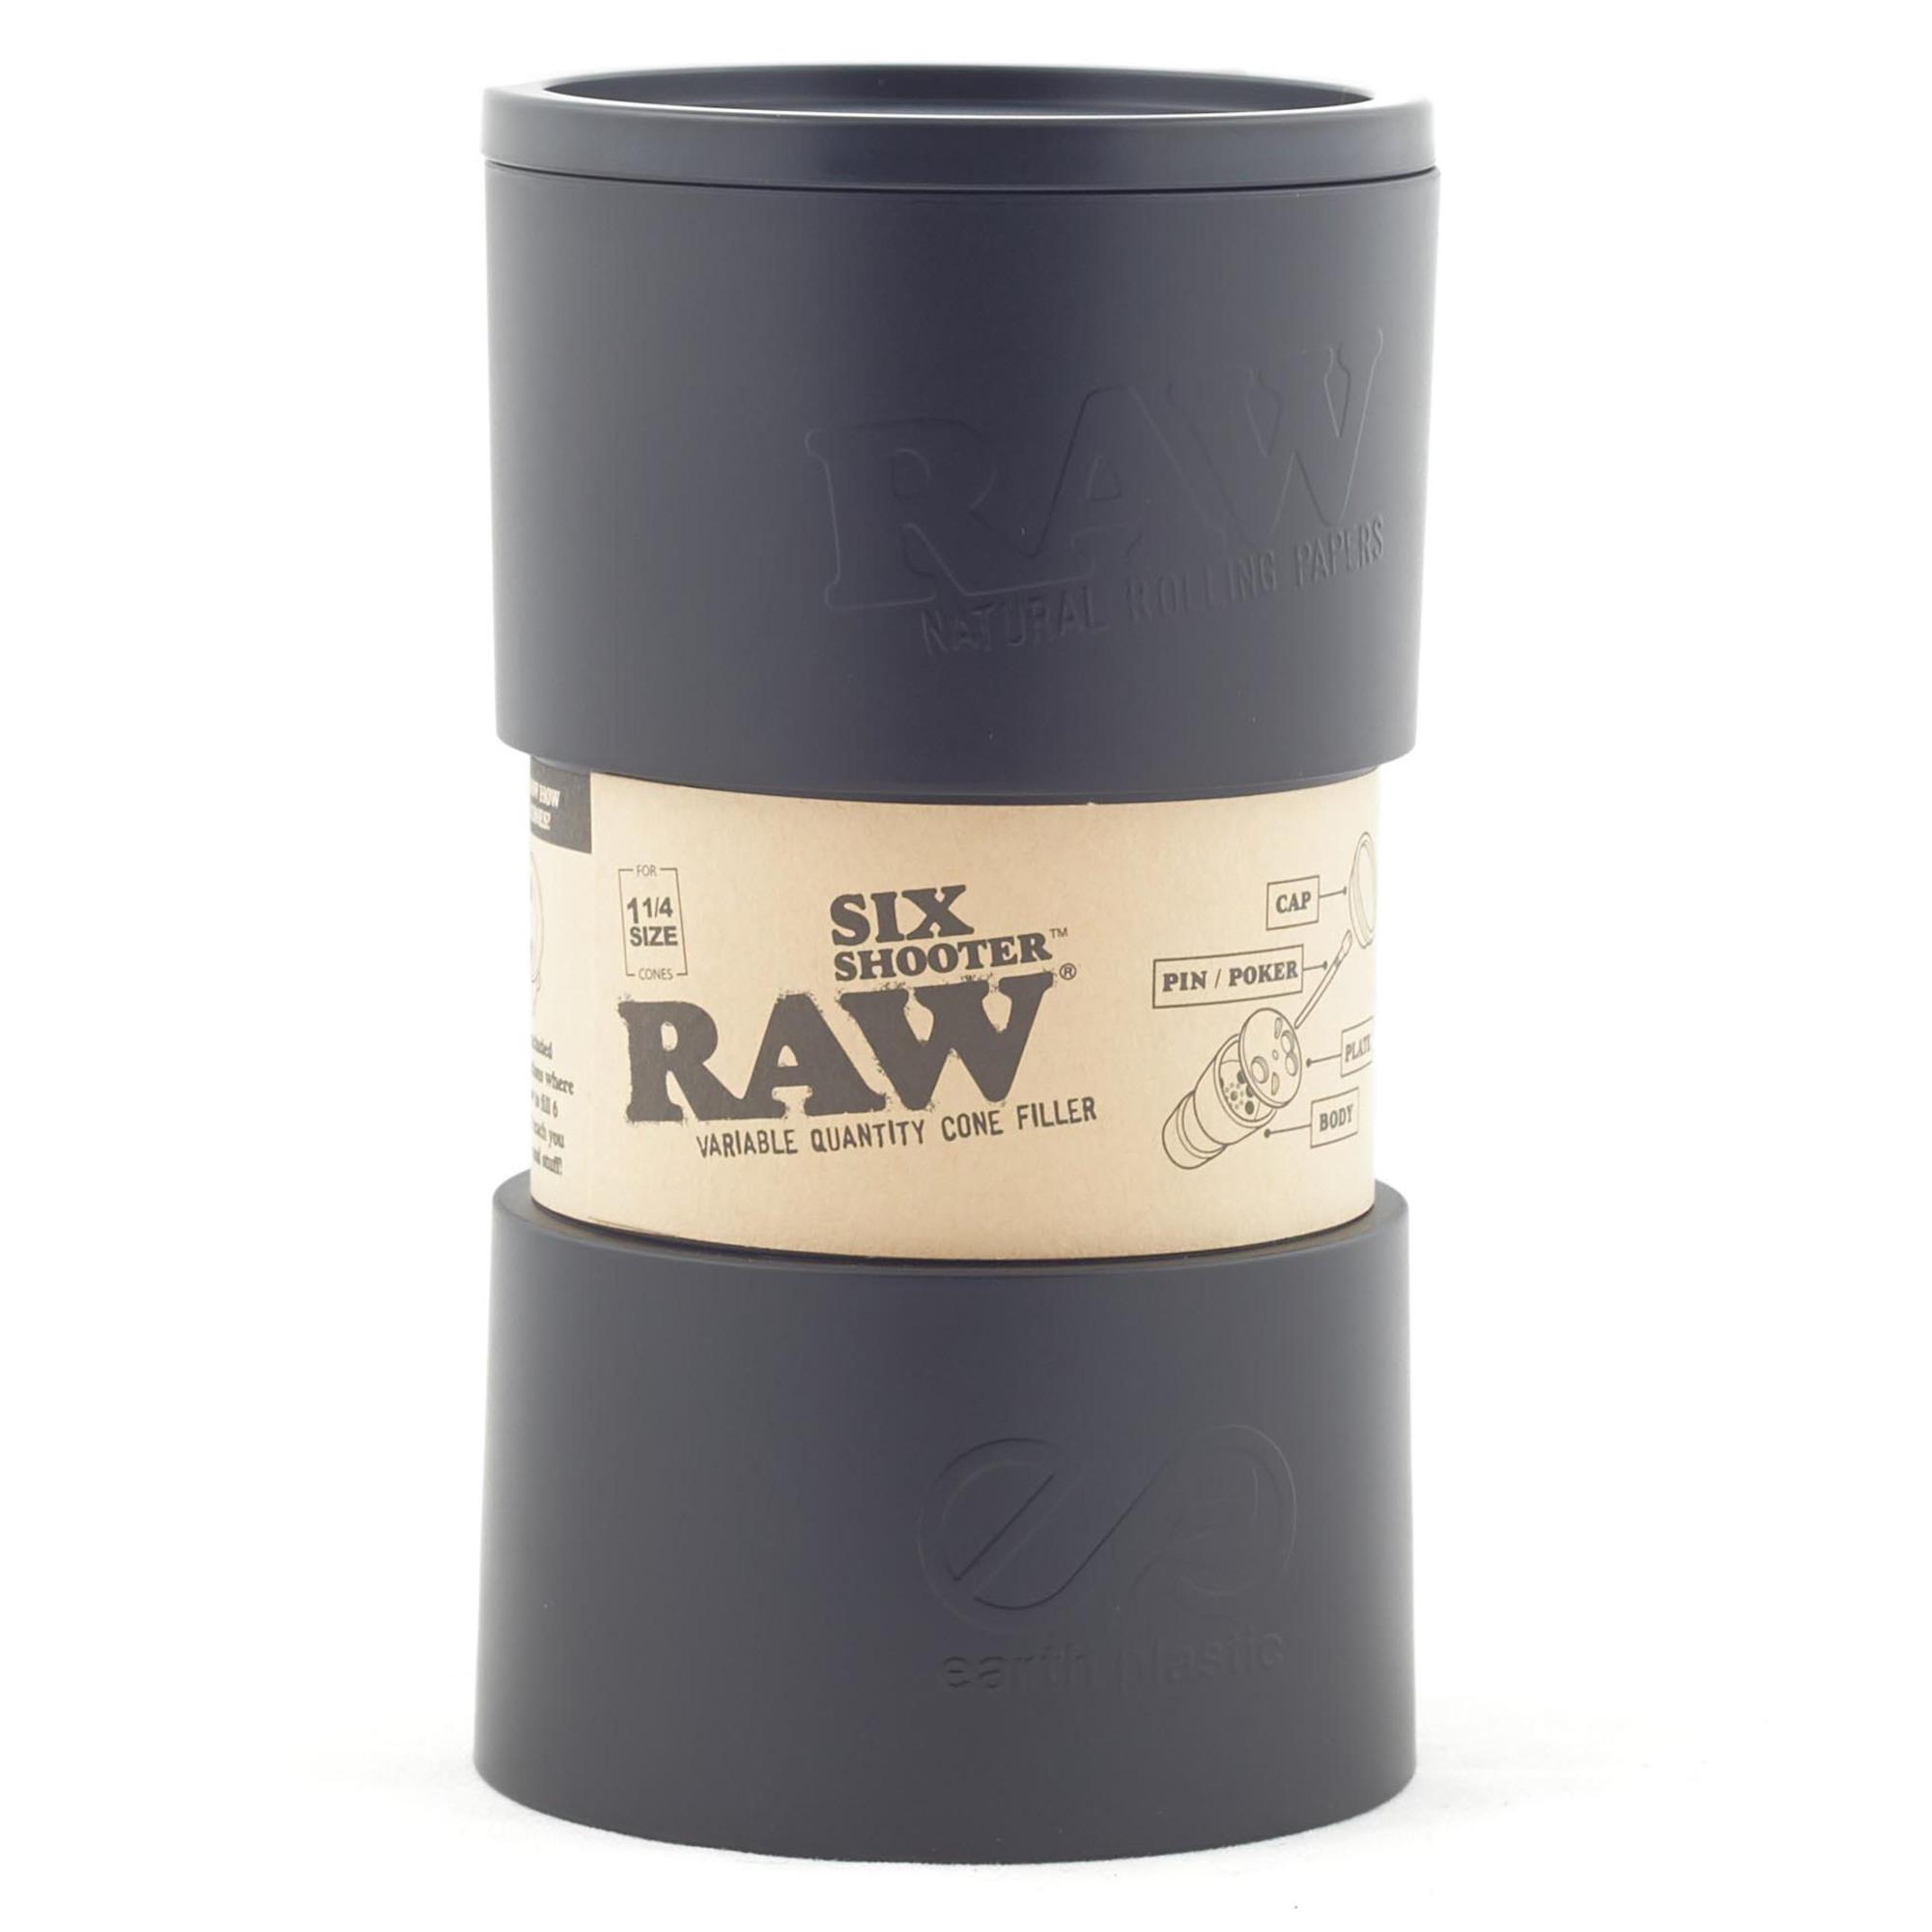 RAW SIX SHOOTER 1/4 CONE FILLER